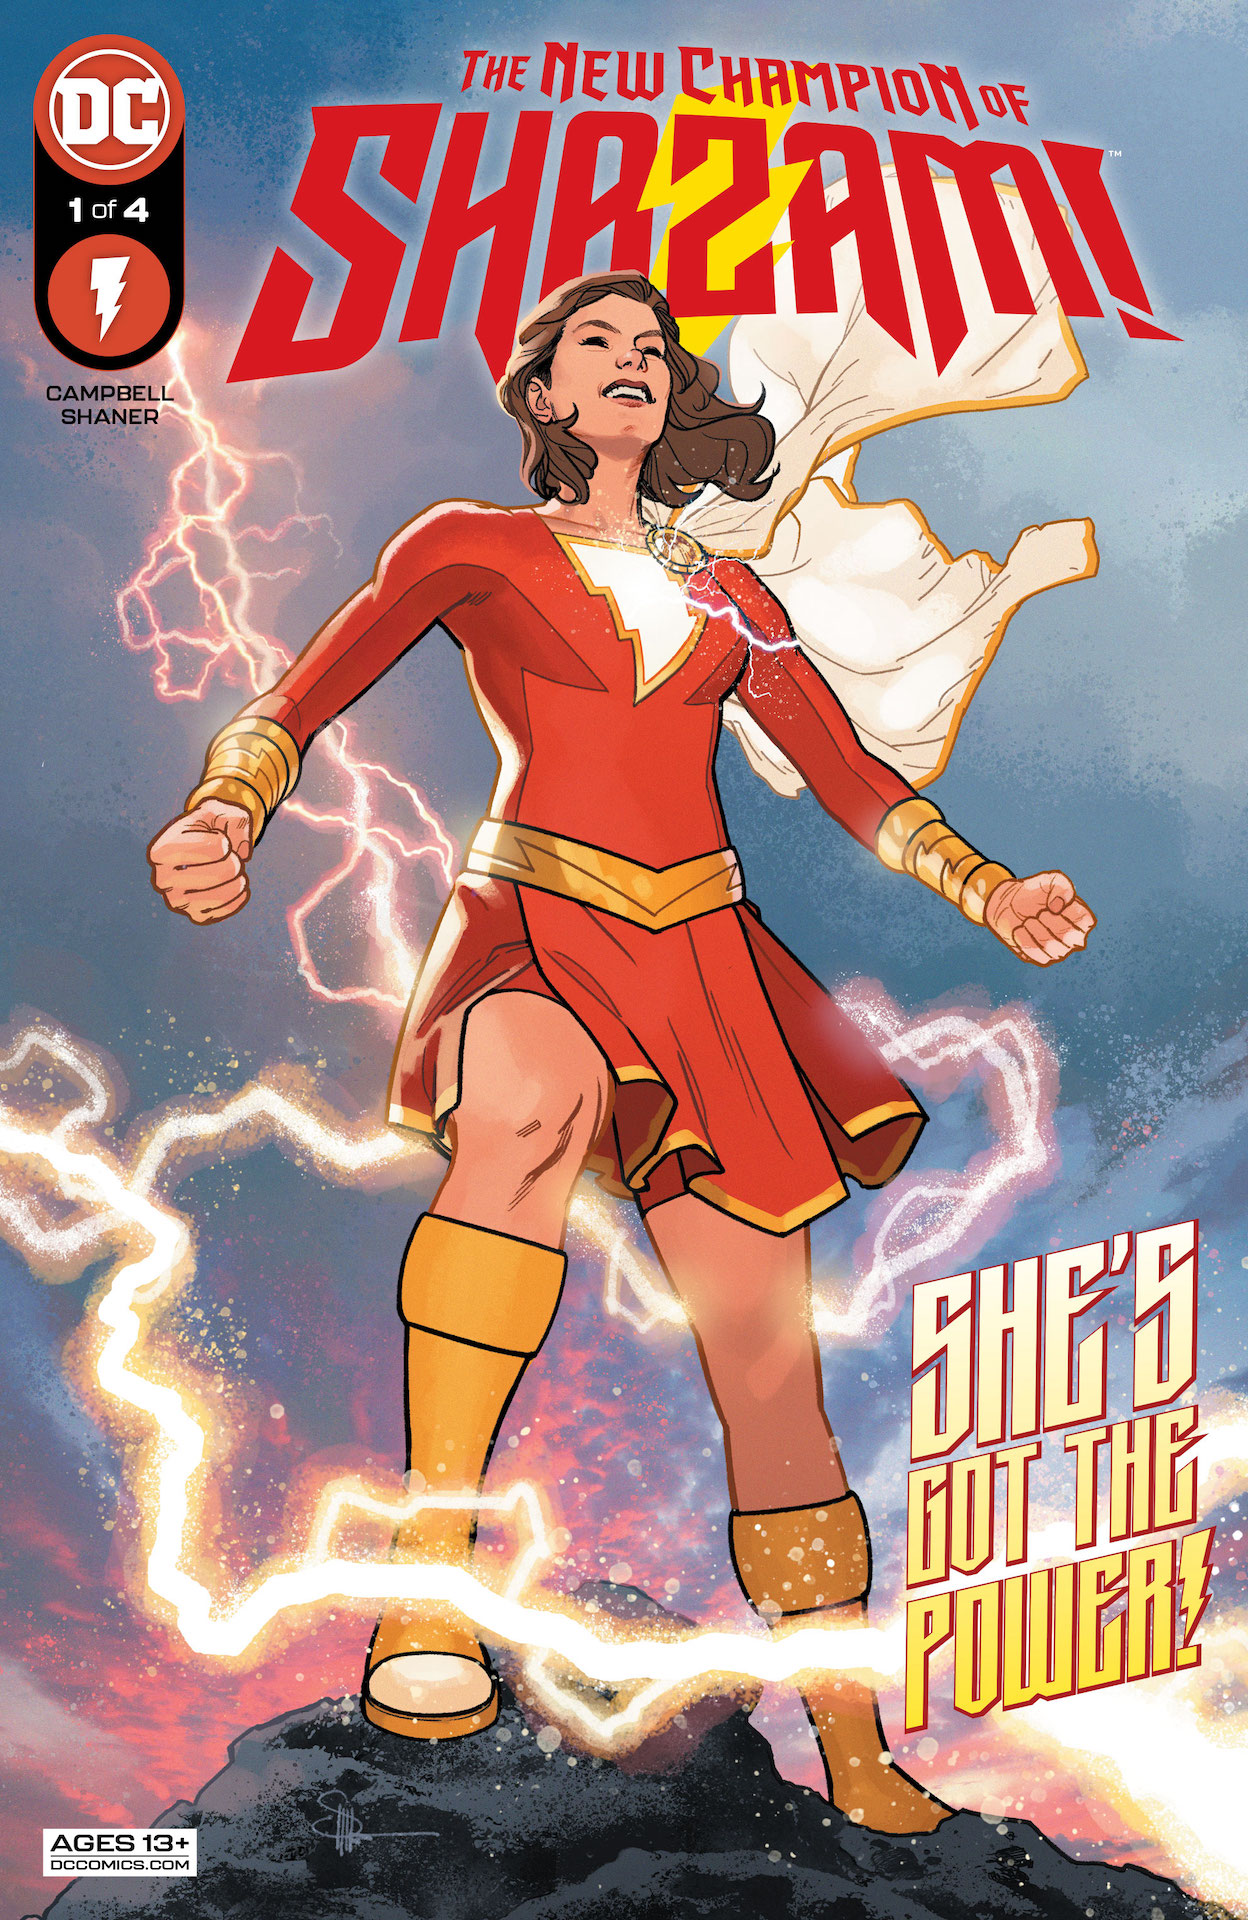 DC Preview: The New Champion of Shazam! #1